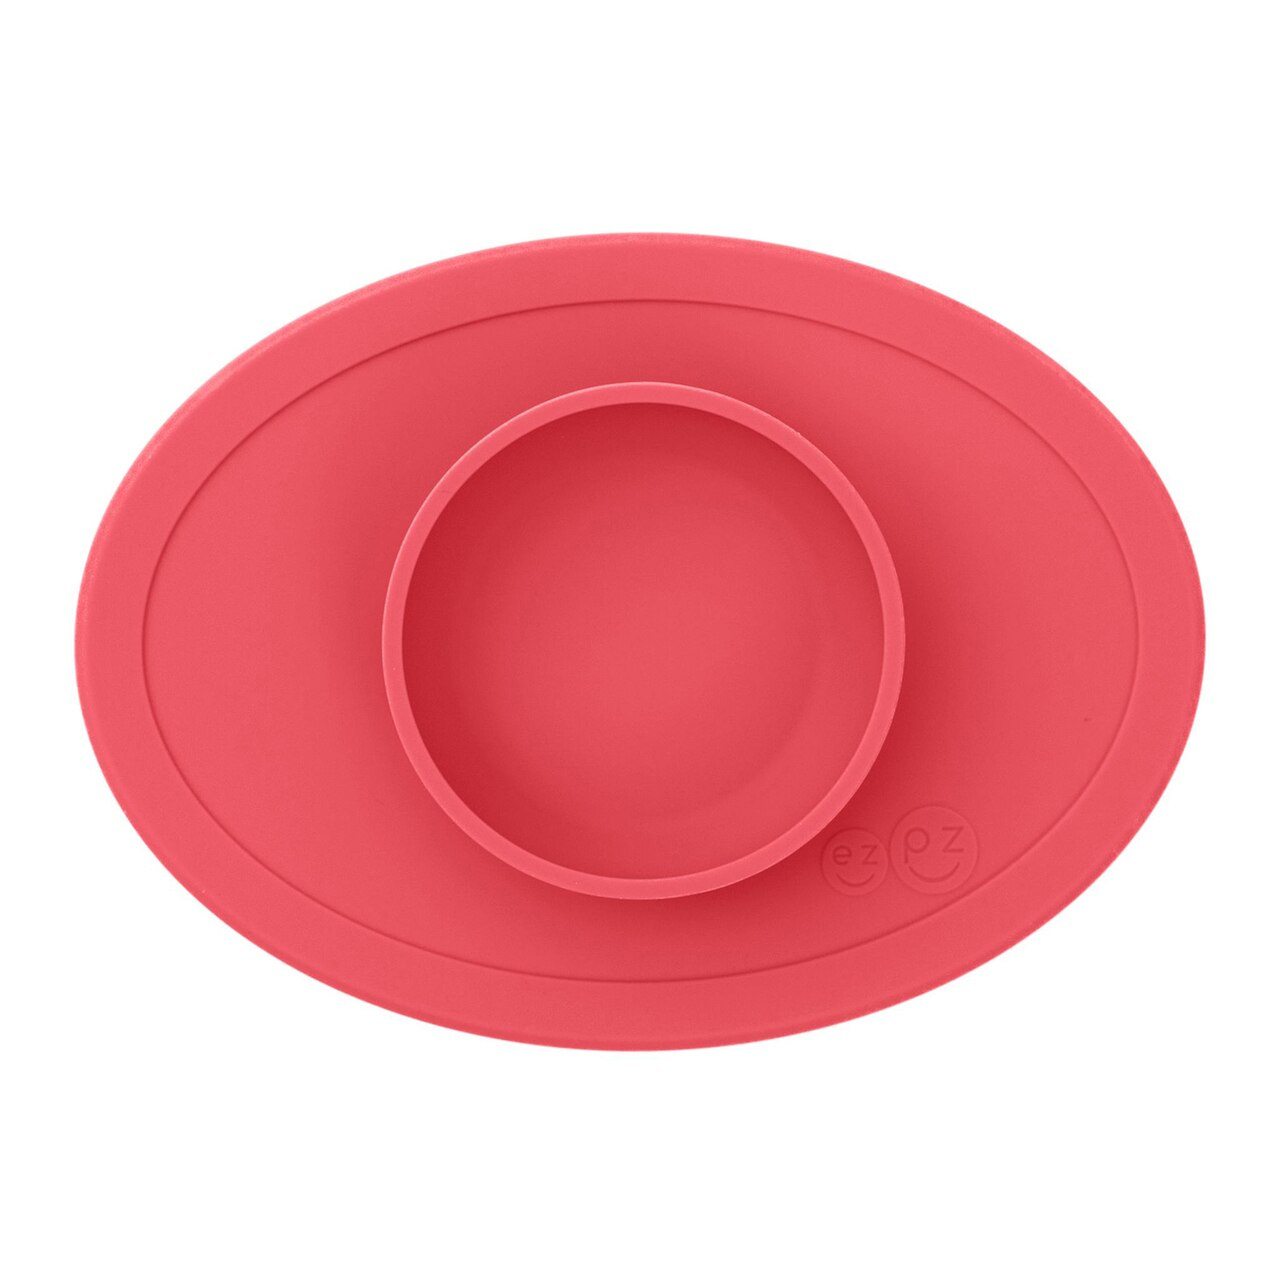 EZPZ Food Coral Tiny Bowl made by silicone that is bendable and easily bent.